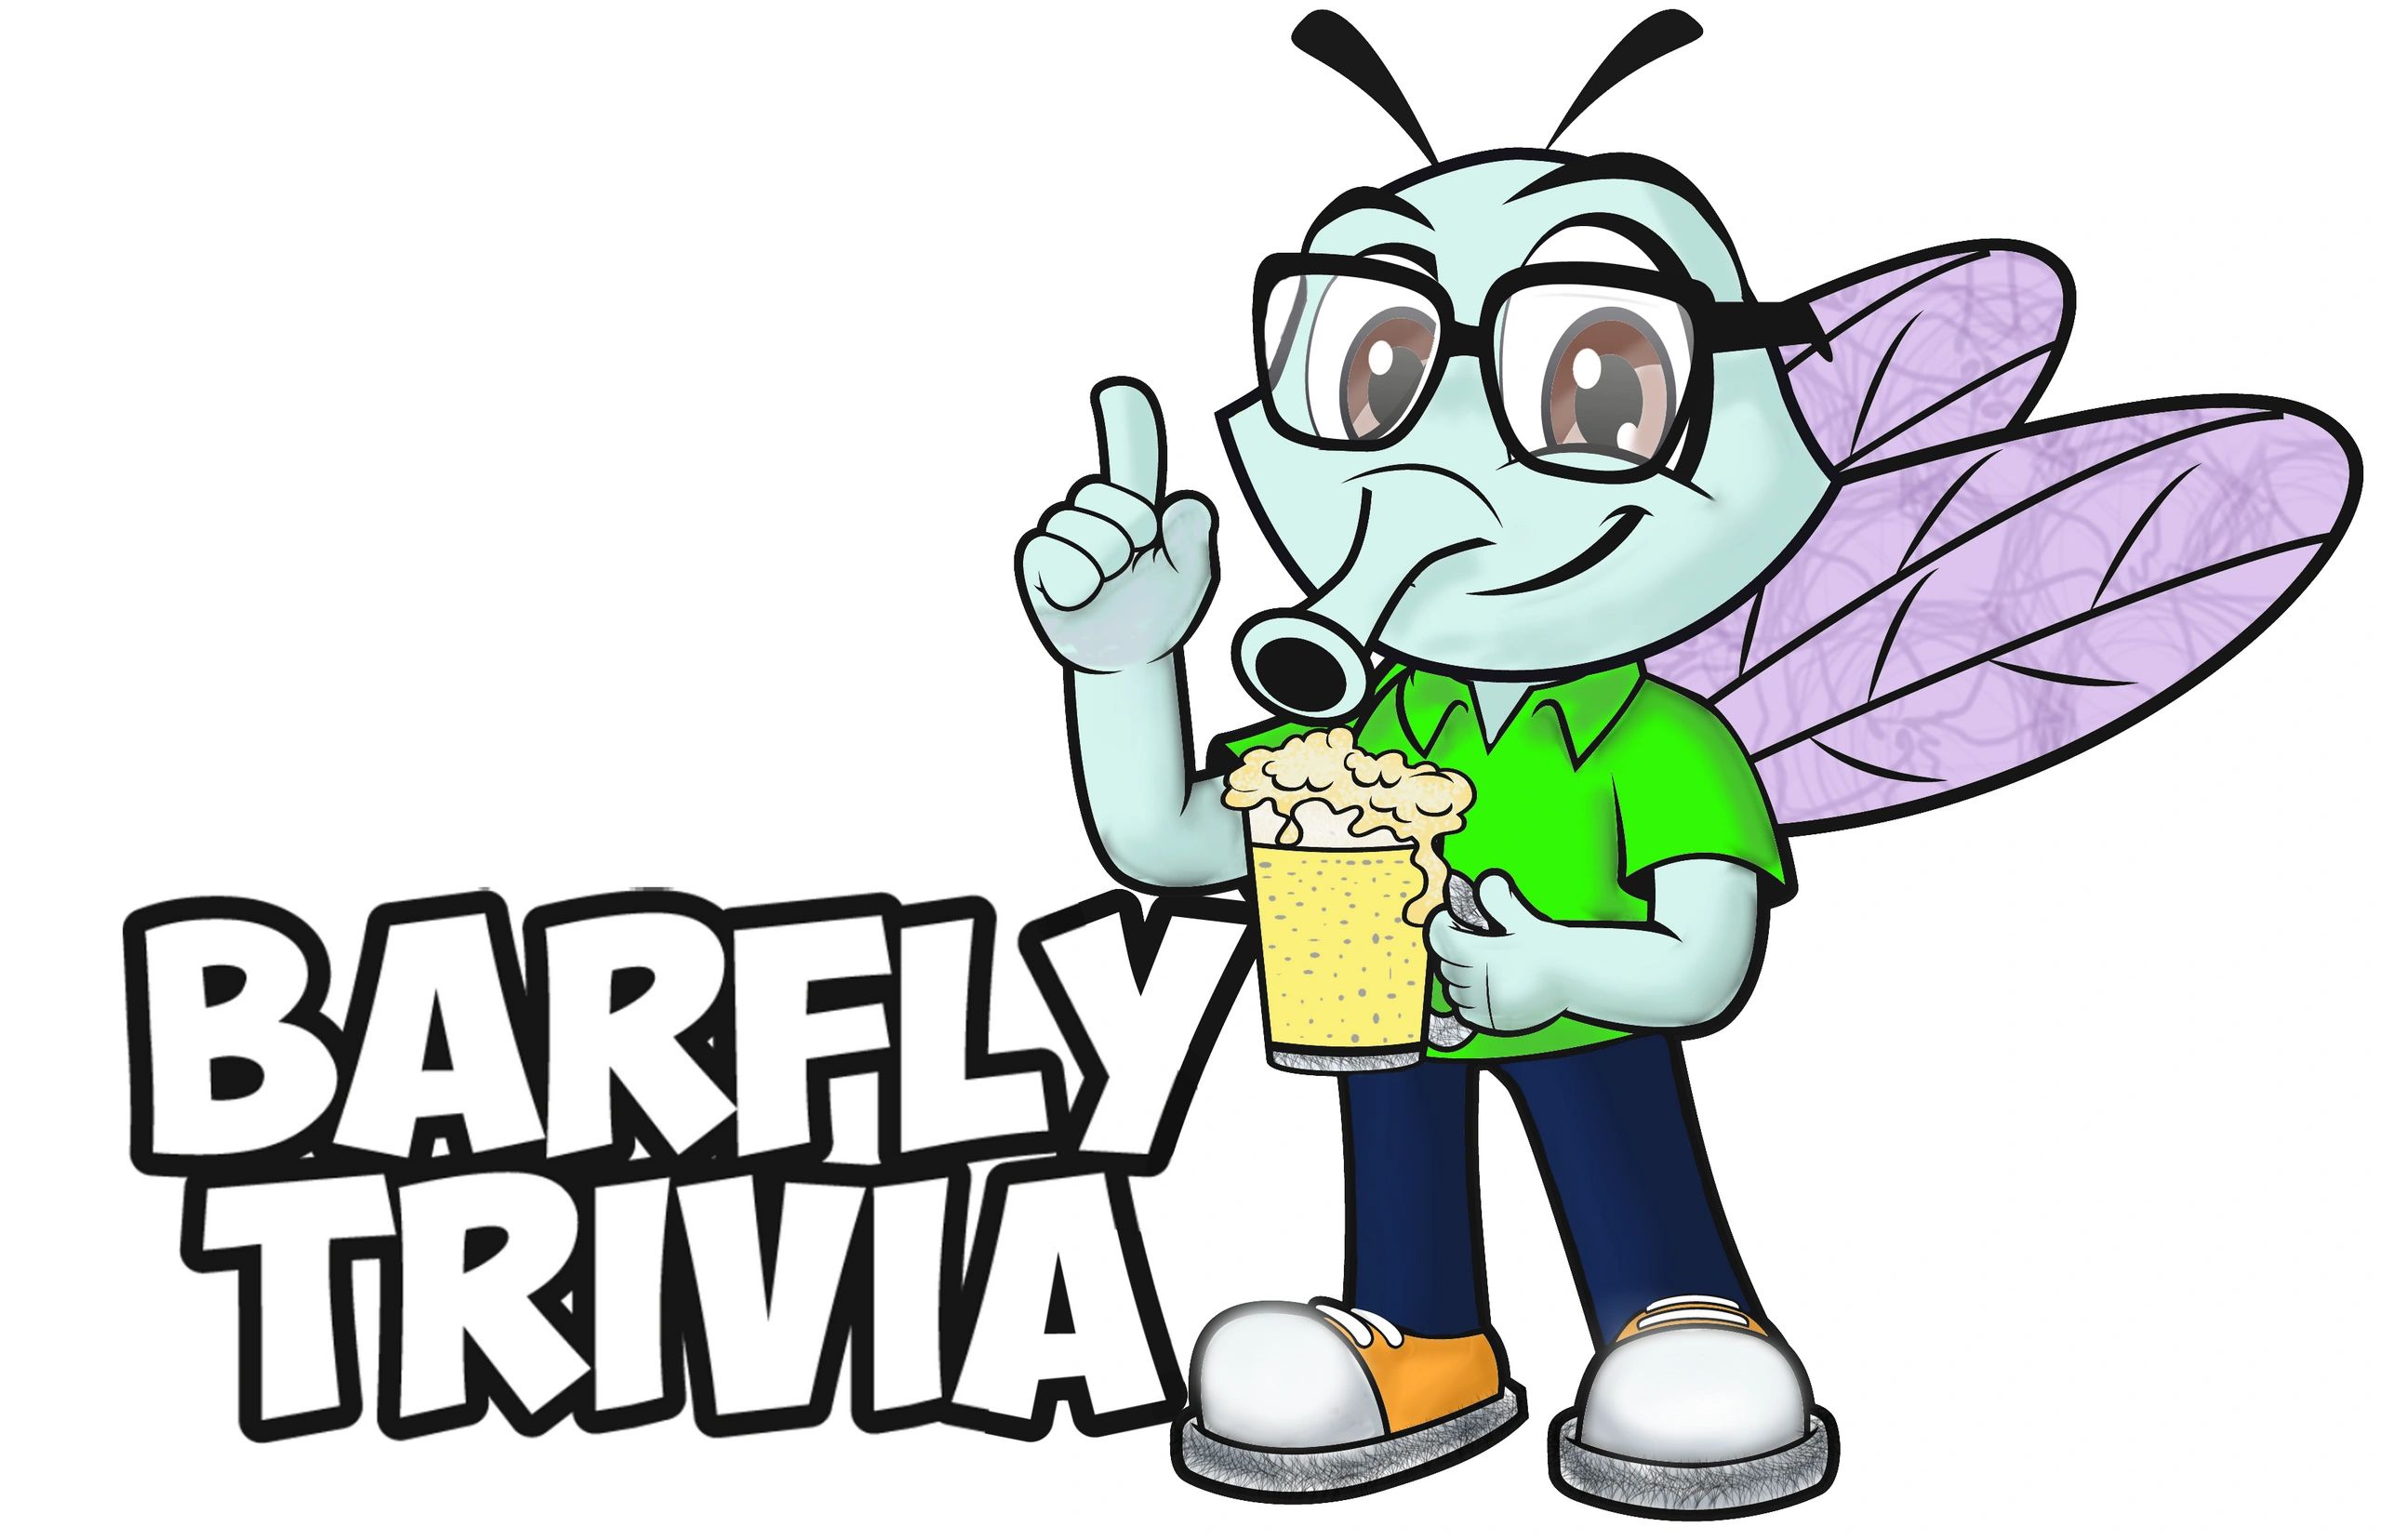 For all your online and in person trivia needs!